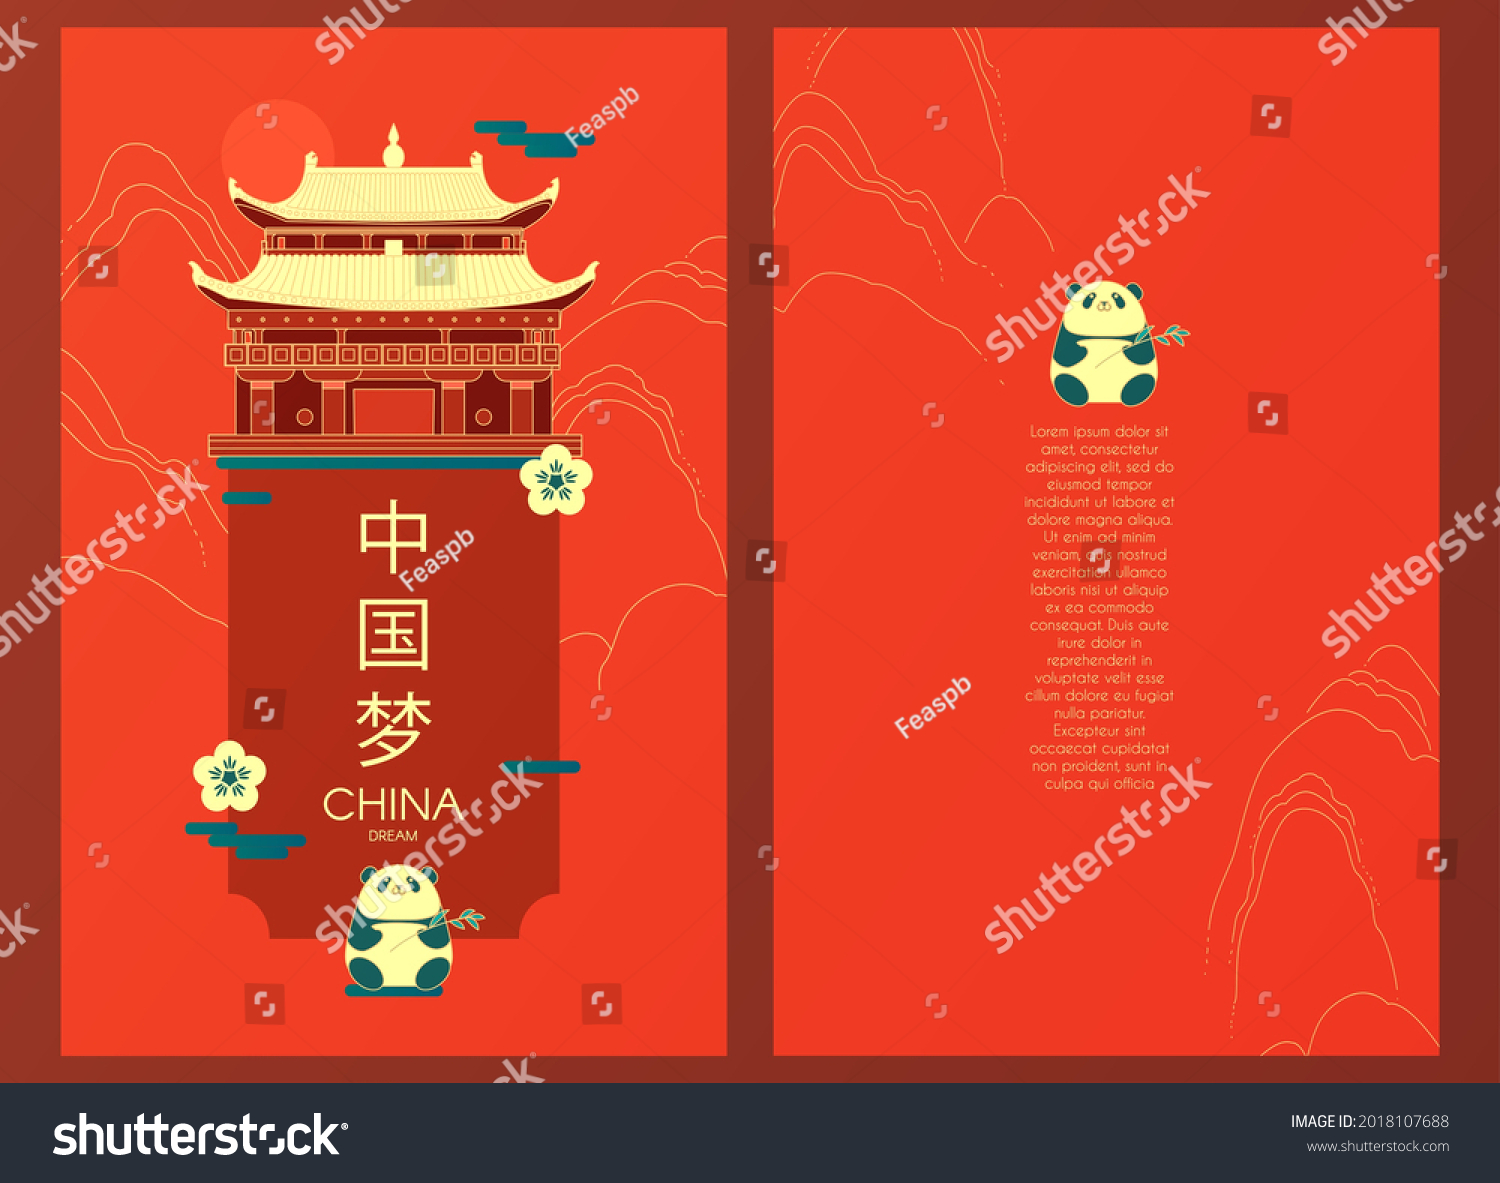 SVG of China design with pagoda temple,panda bear and mountains. Traditional Chinese style card template. Asian holiday banner, poster and menu flyer design template. Chinese text means 